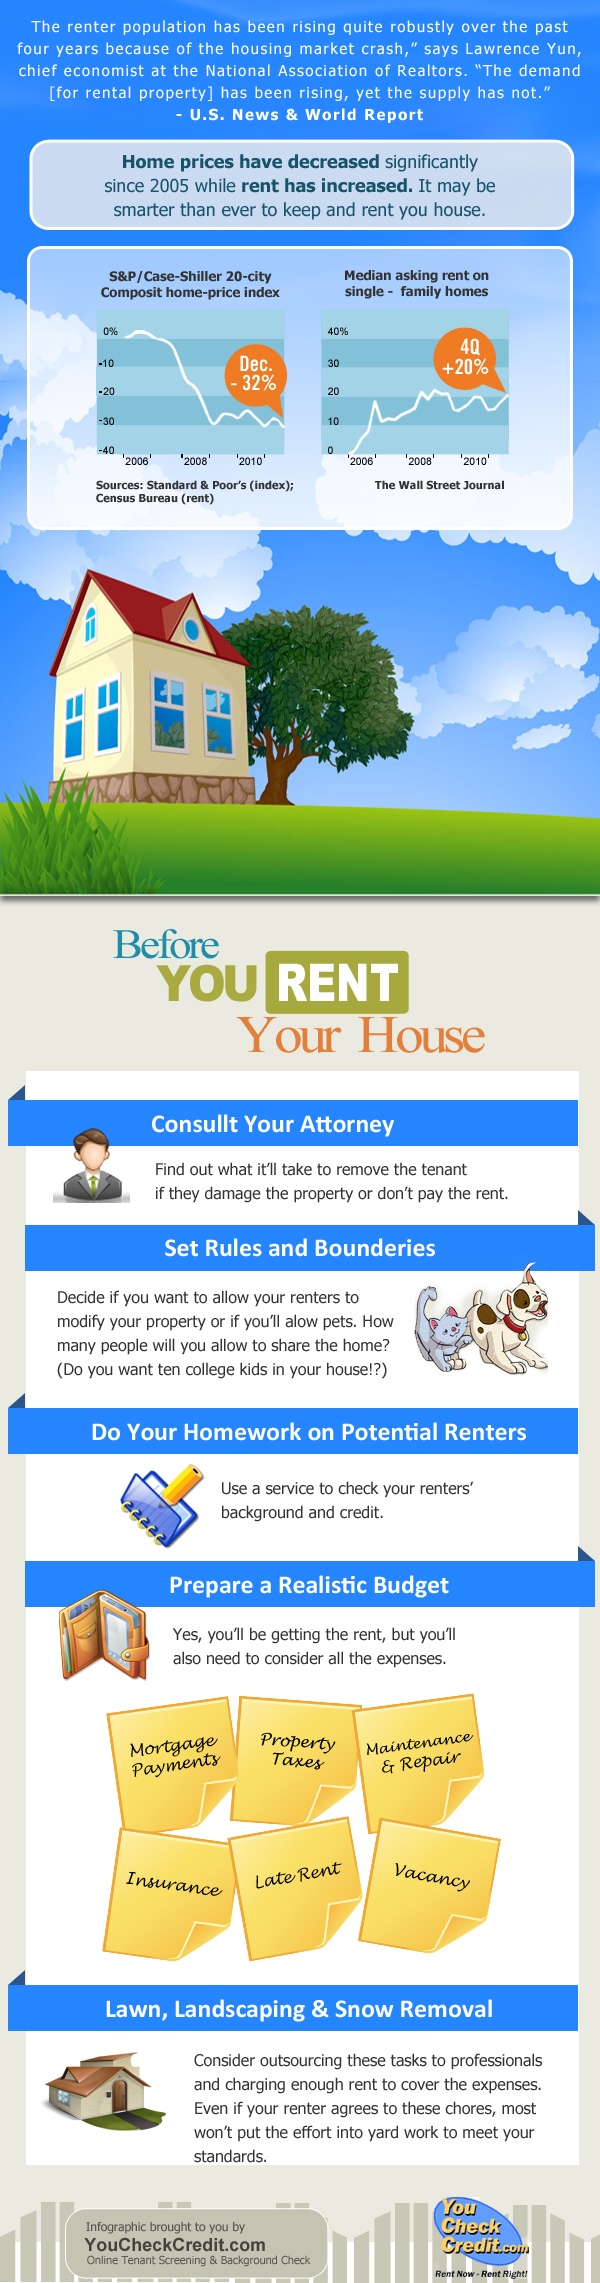 Before you rent your house infographic